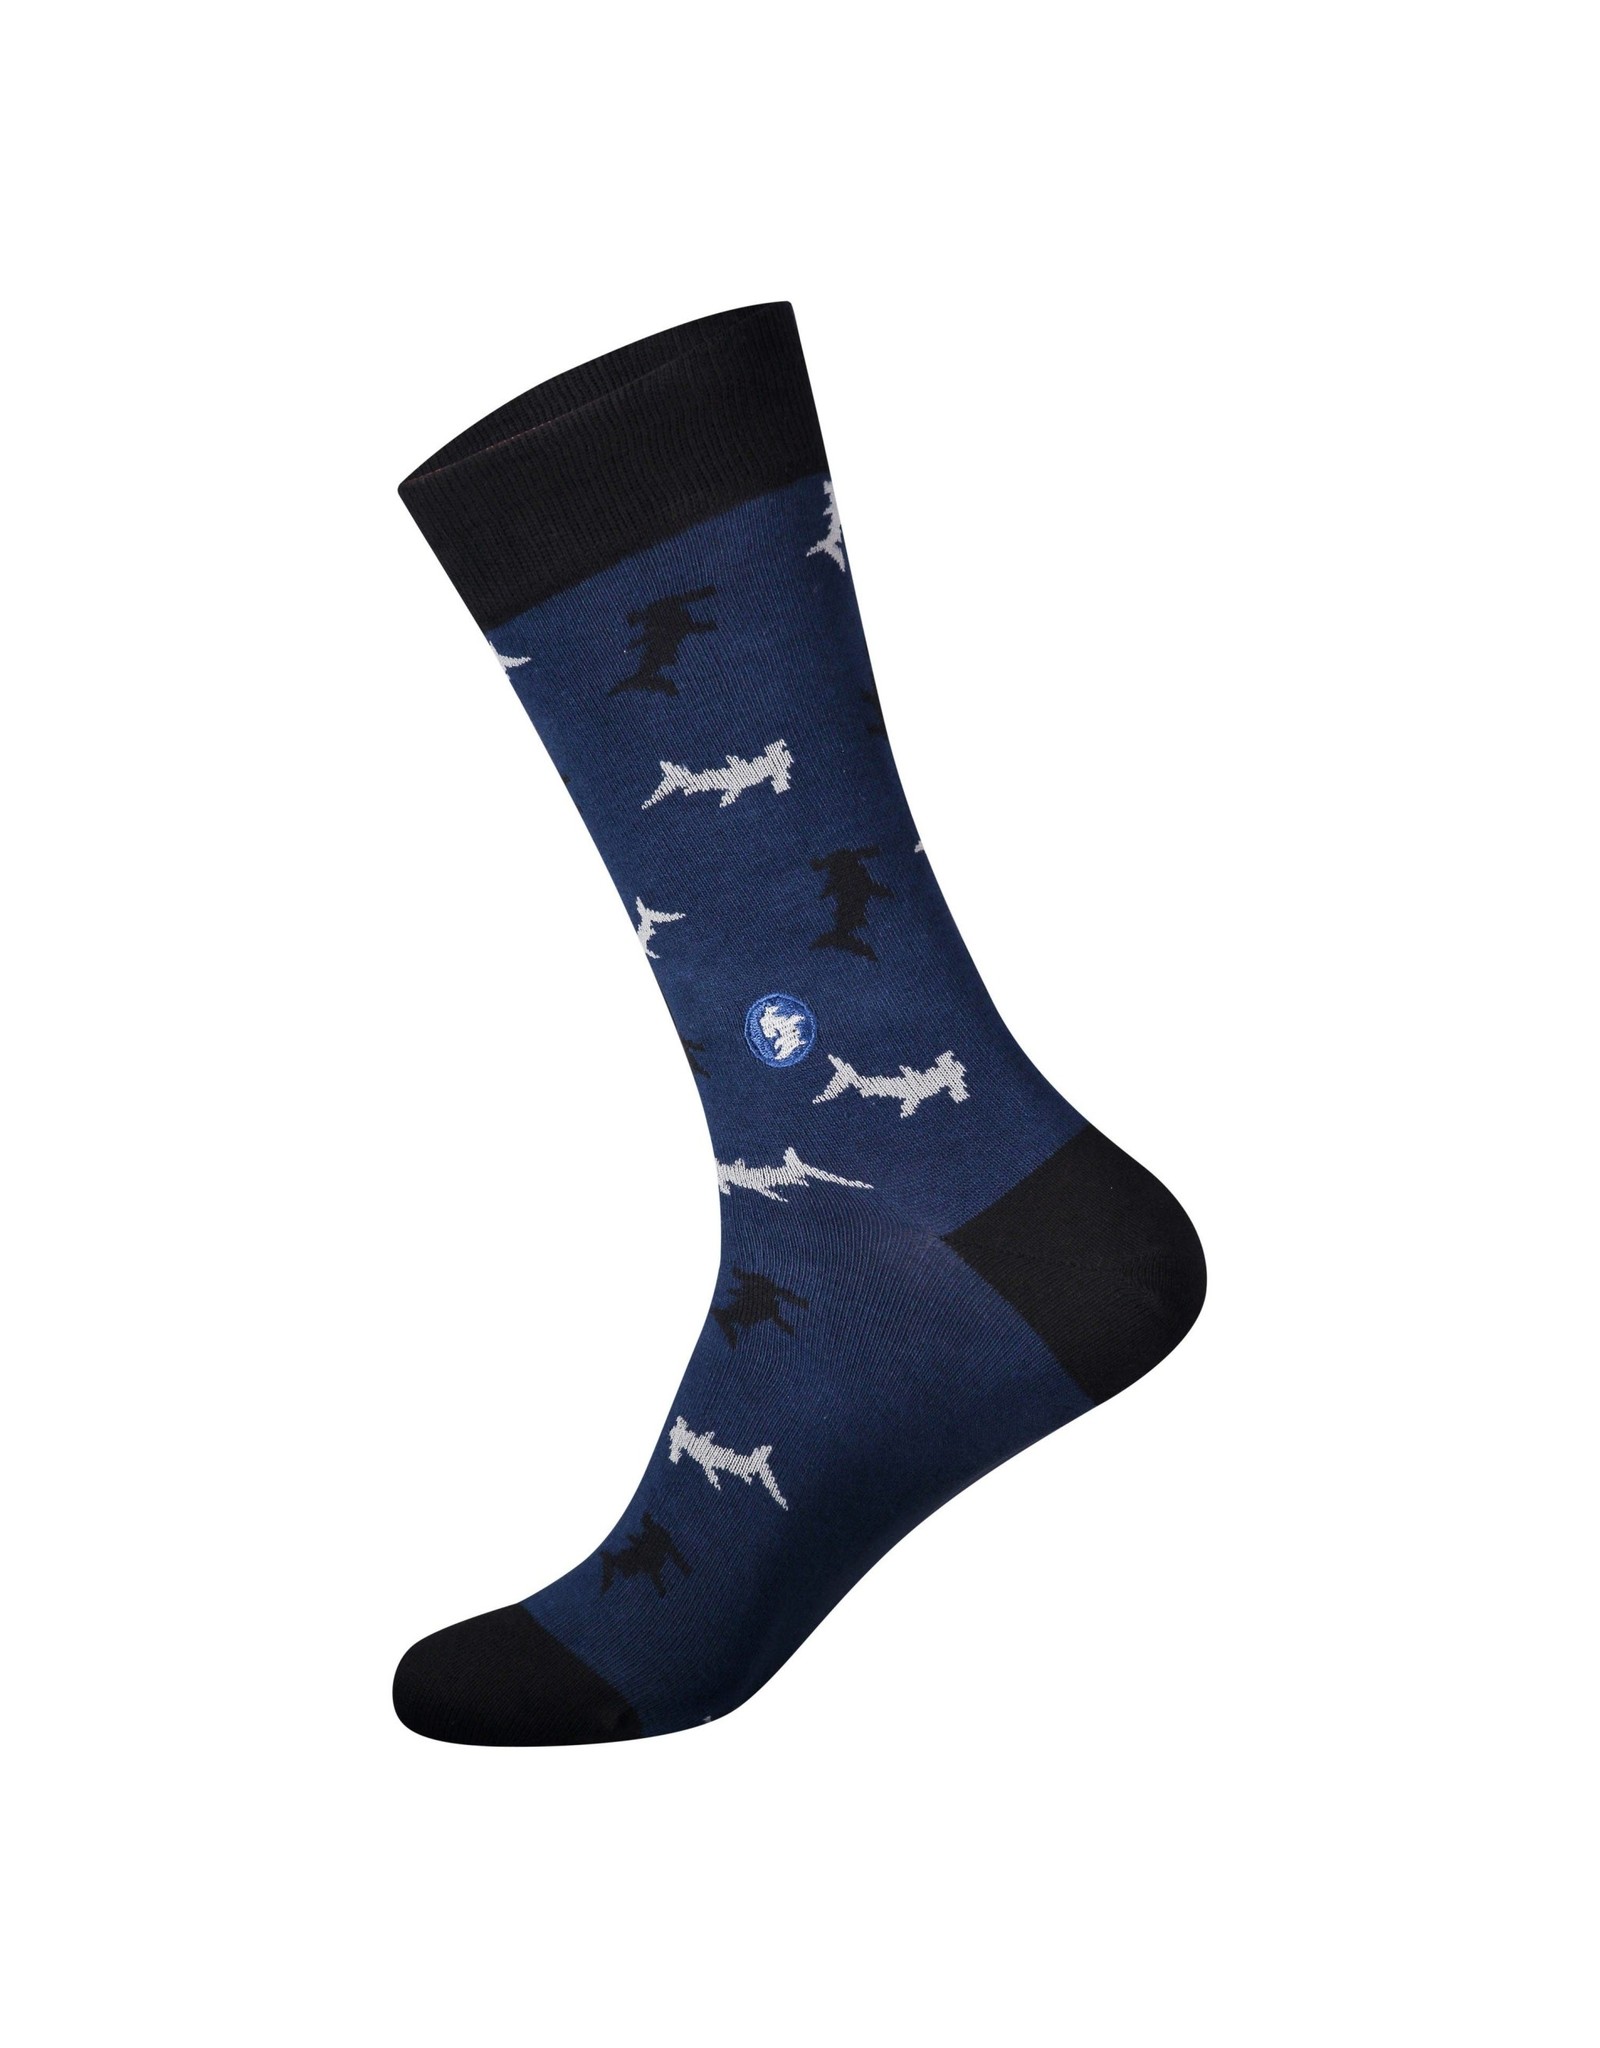 Trade roots Socks that Protect Sharks